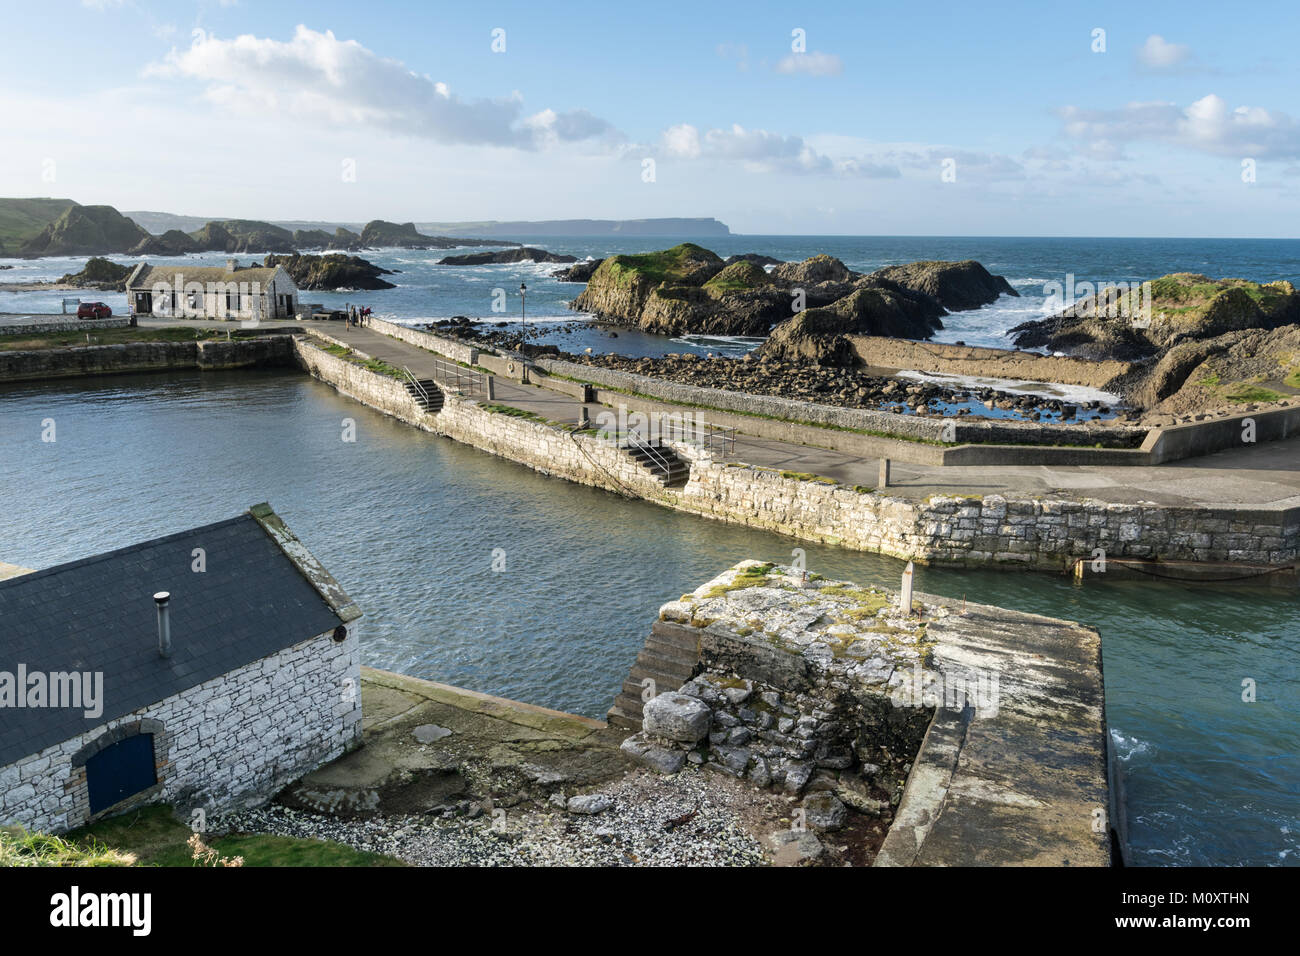 This Ballintoy Harbour which is located on the Antrim Coast in Northern Ireland.  It is an old Fishing boat harbour that has been used as a film set Stock Photo